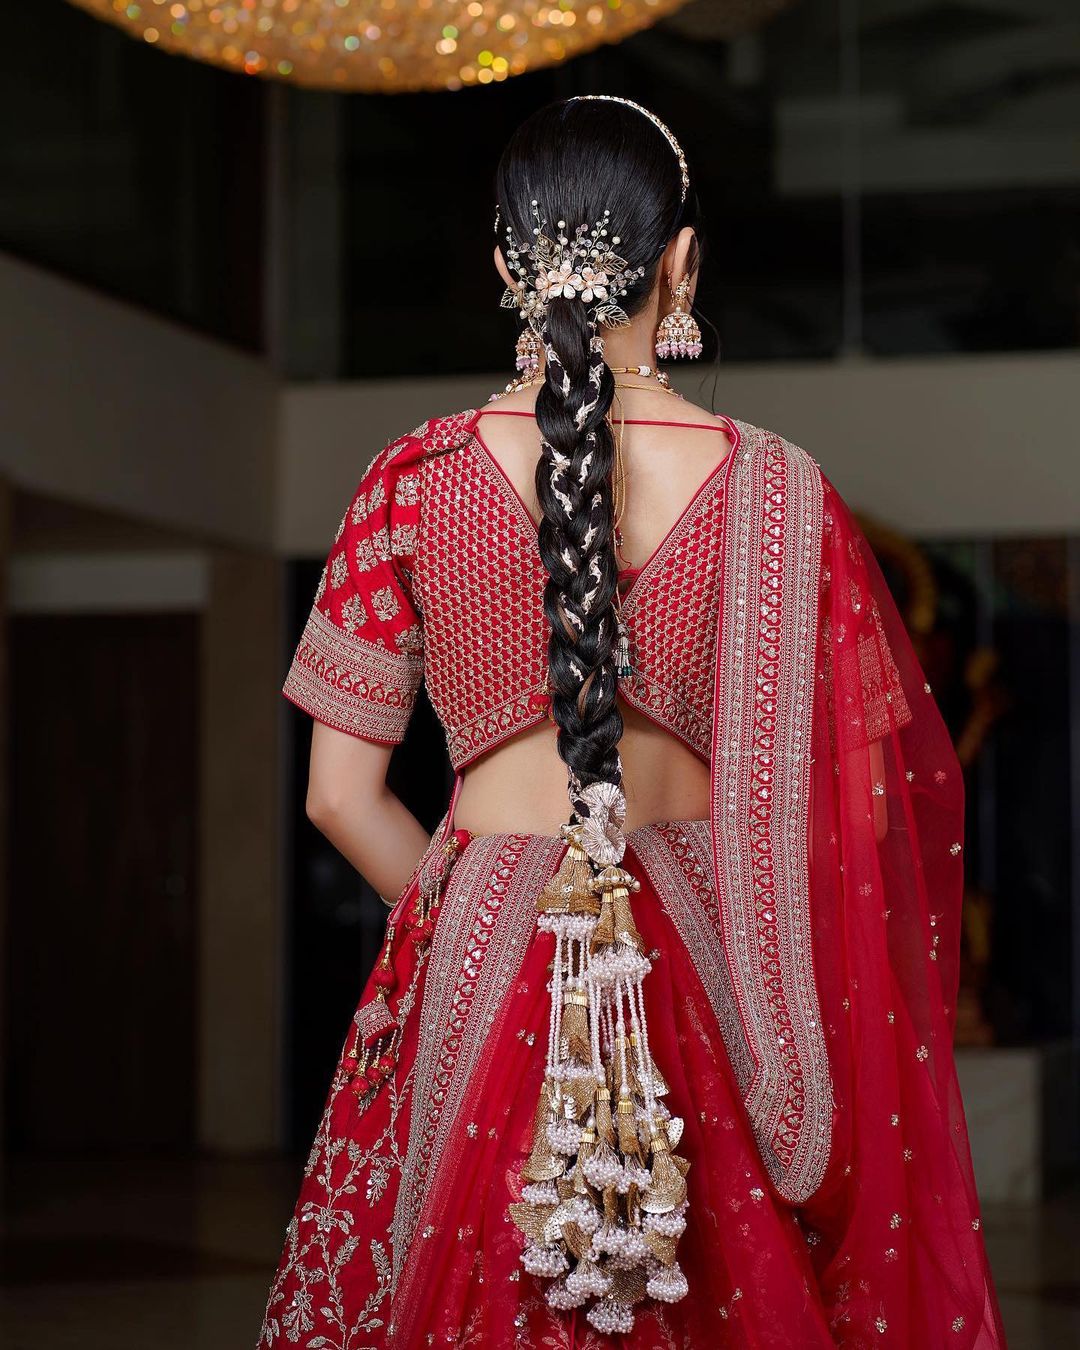 10 Latest Engagement Hair Looks for Indian Bride 2023